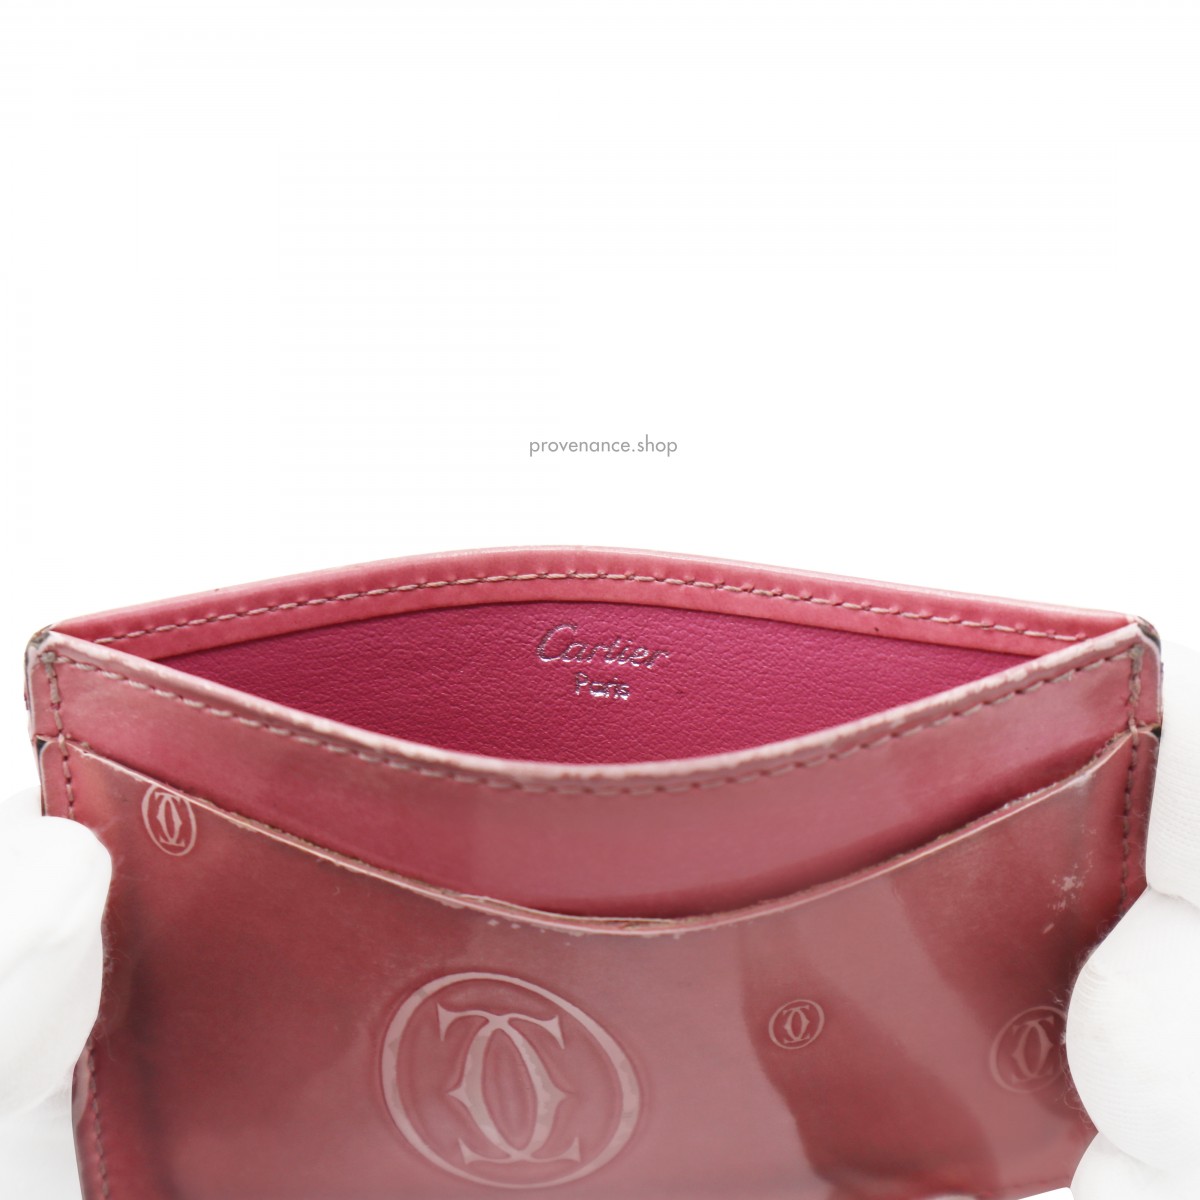 Cartier Happy Cardholder - Pink Patent Leather - 6